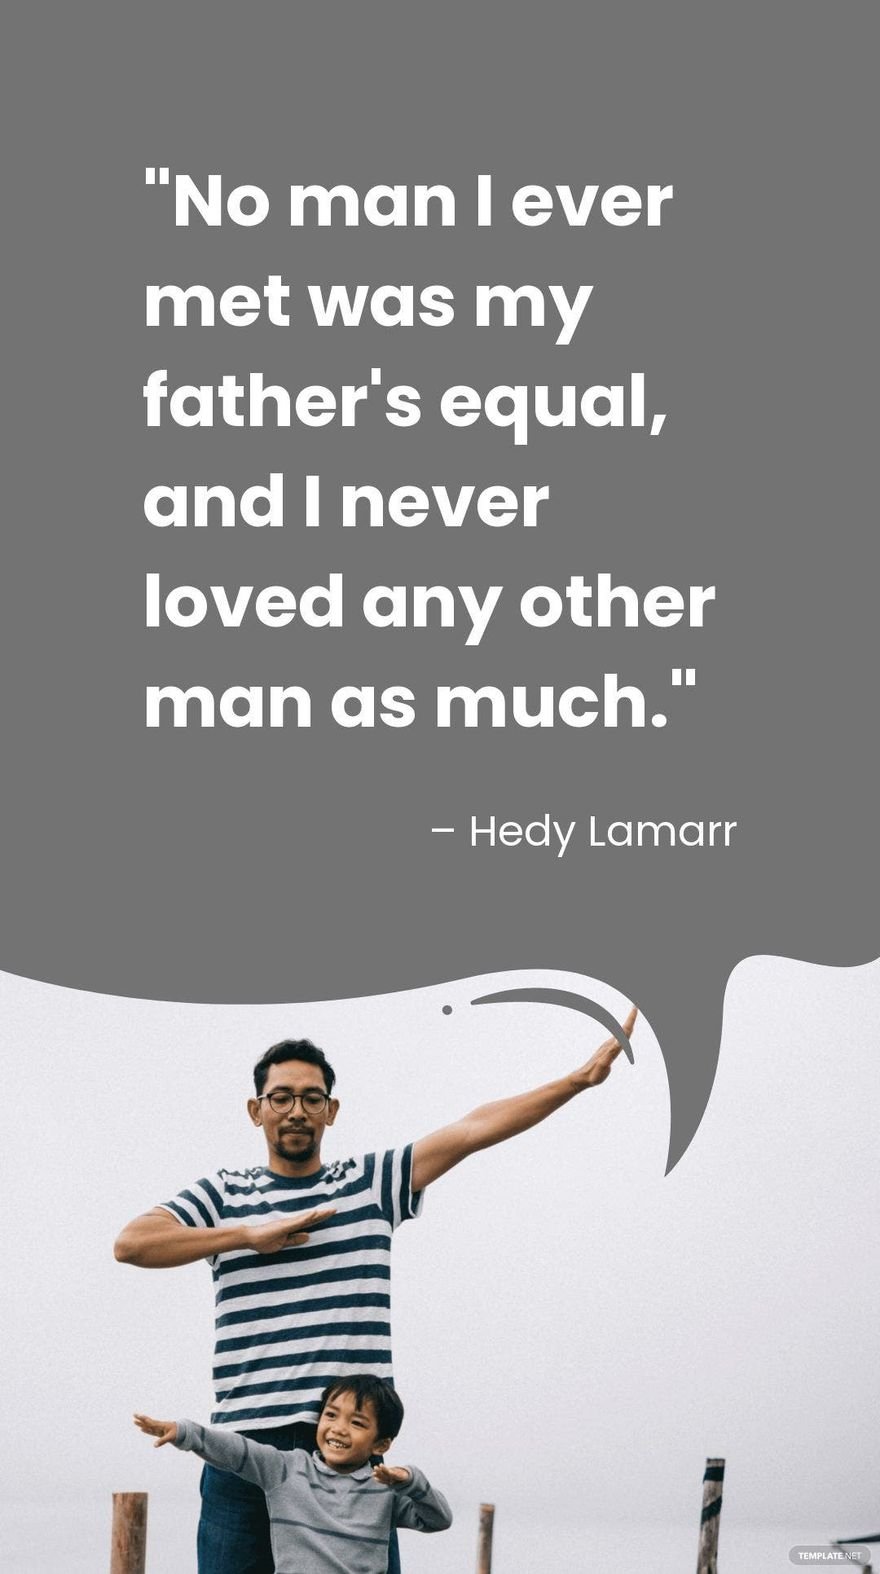 Hedy Lamarr - No man I ever met was my father's equal, and I never loved any other man as much. 